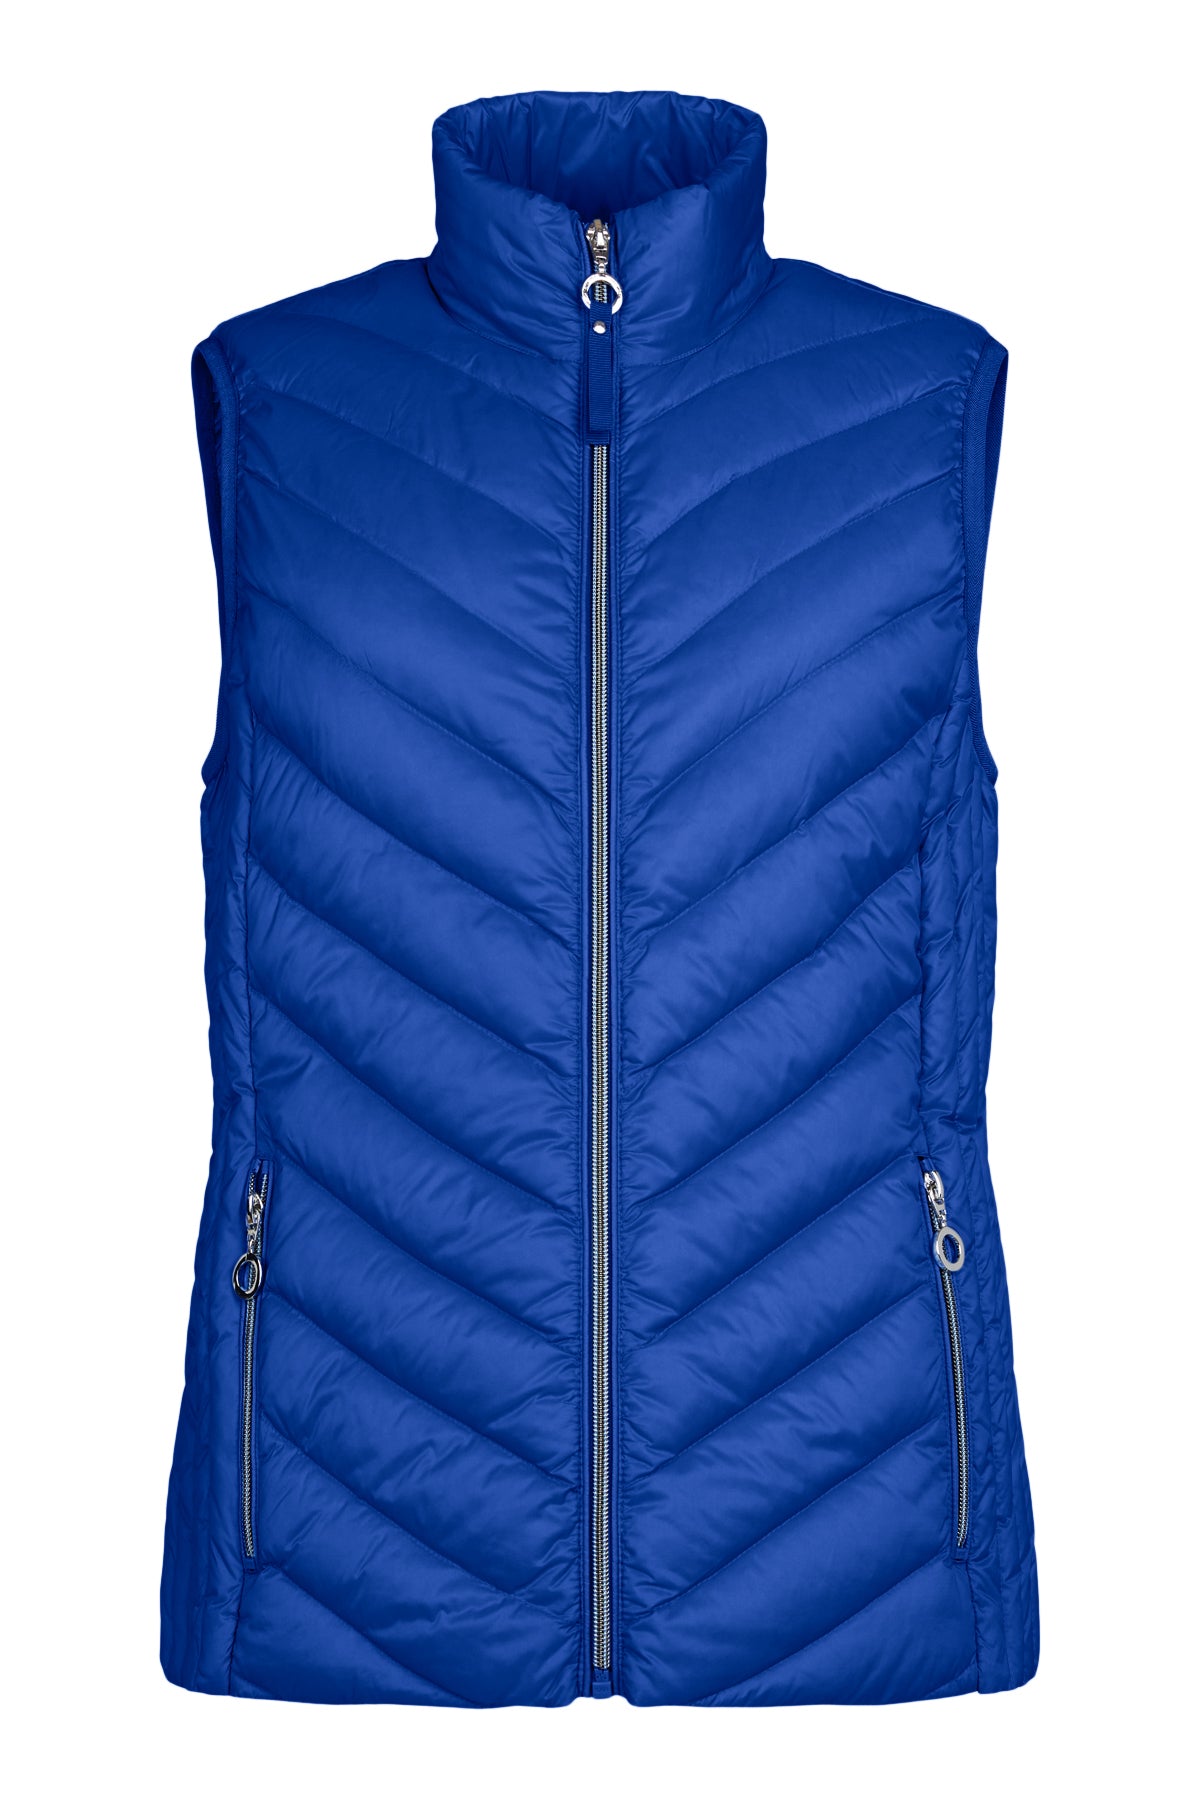 Royal Blue Padded Waistcoat with Zip Detail